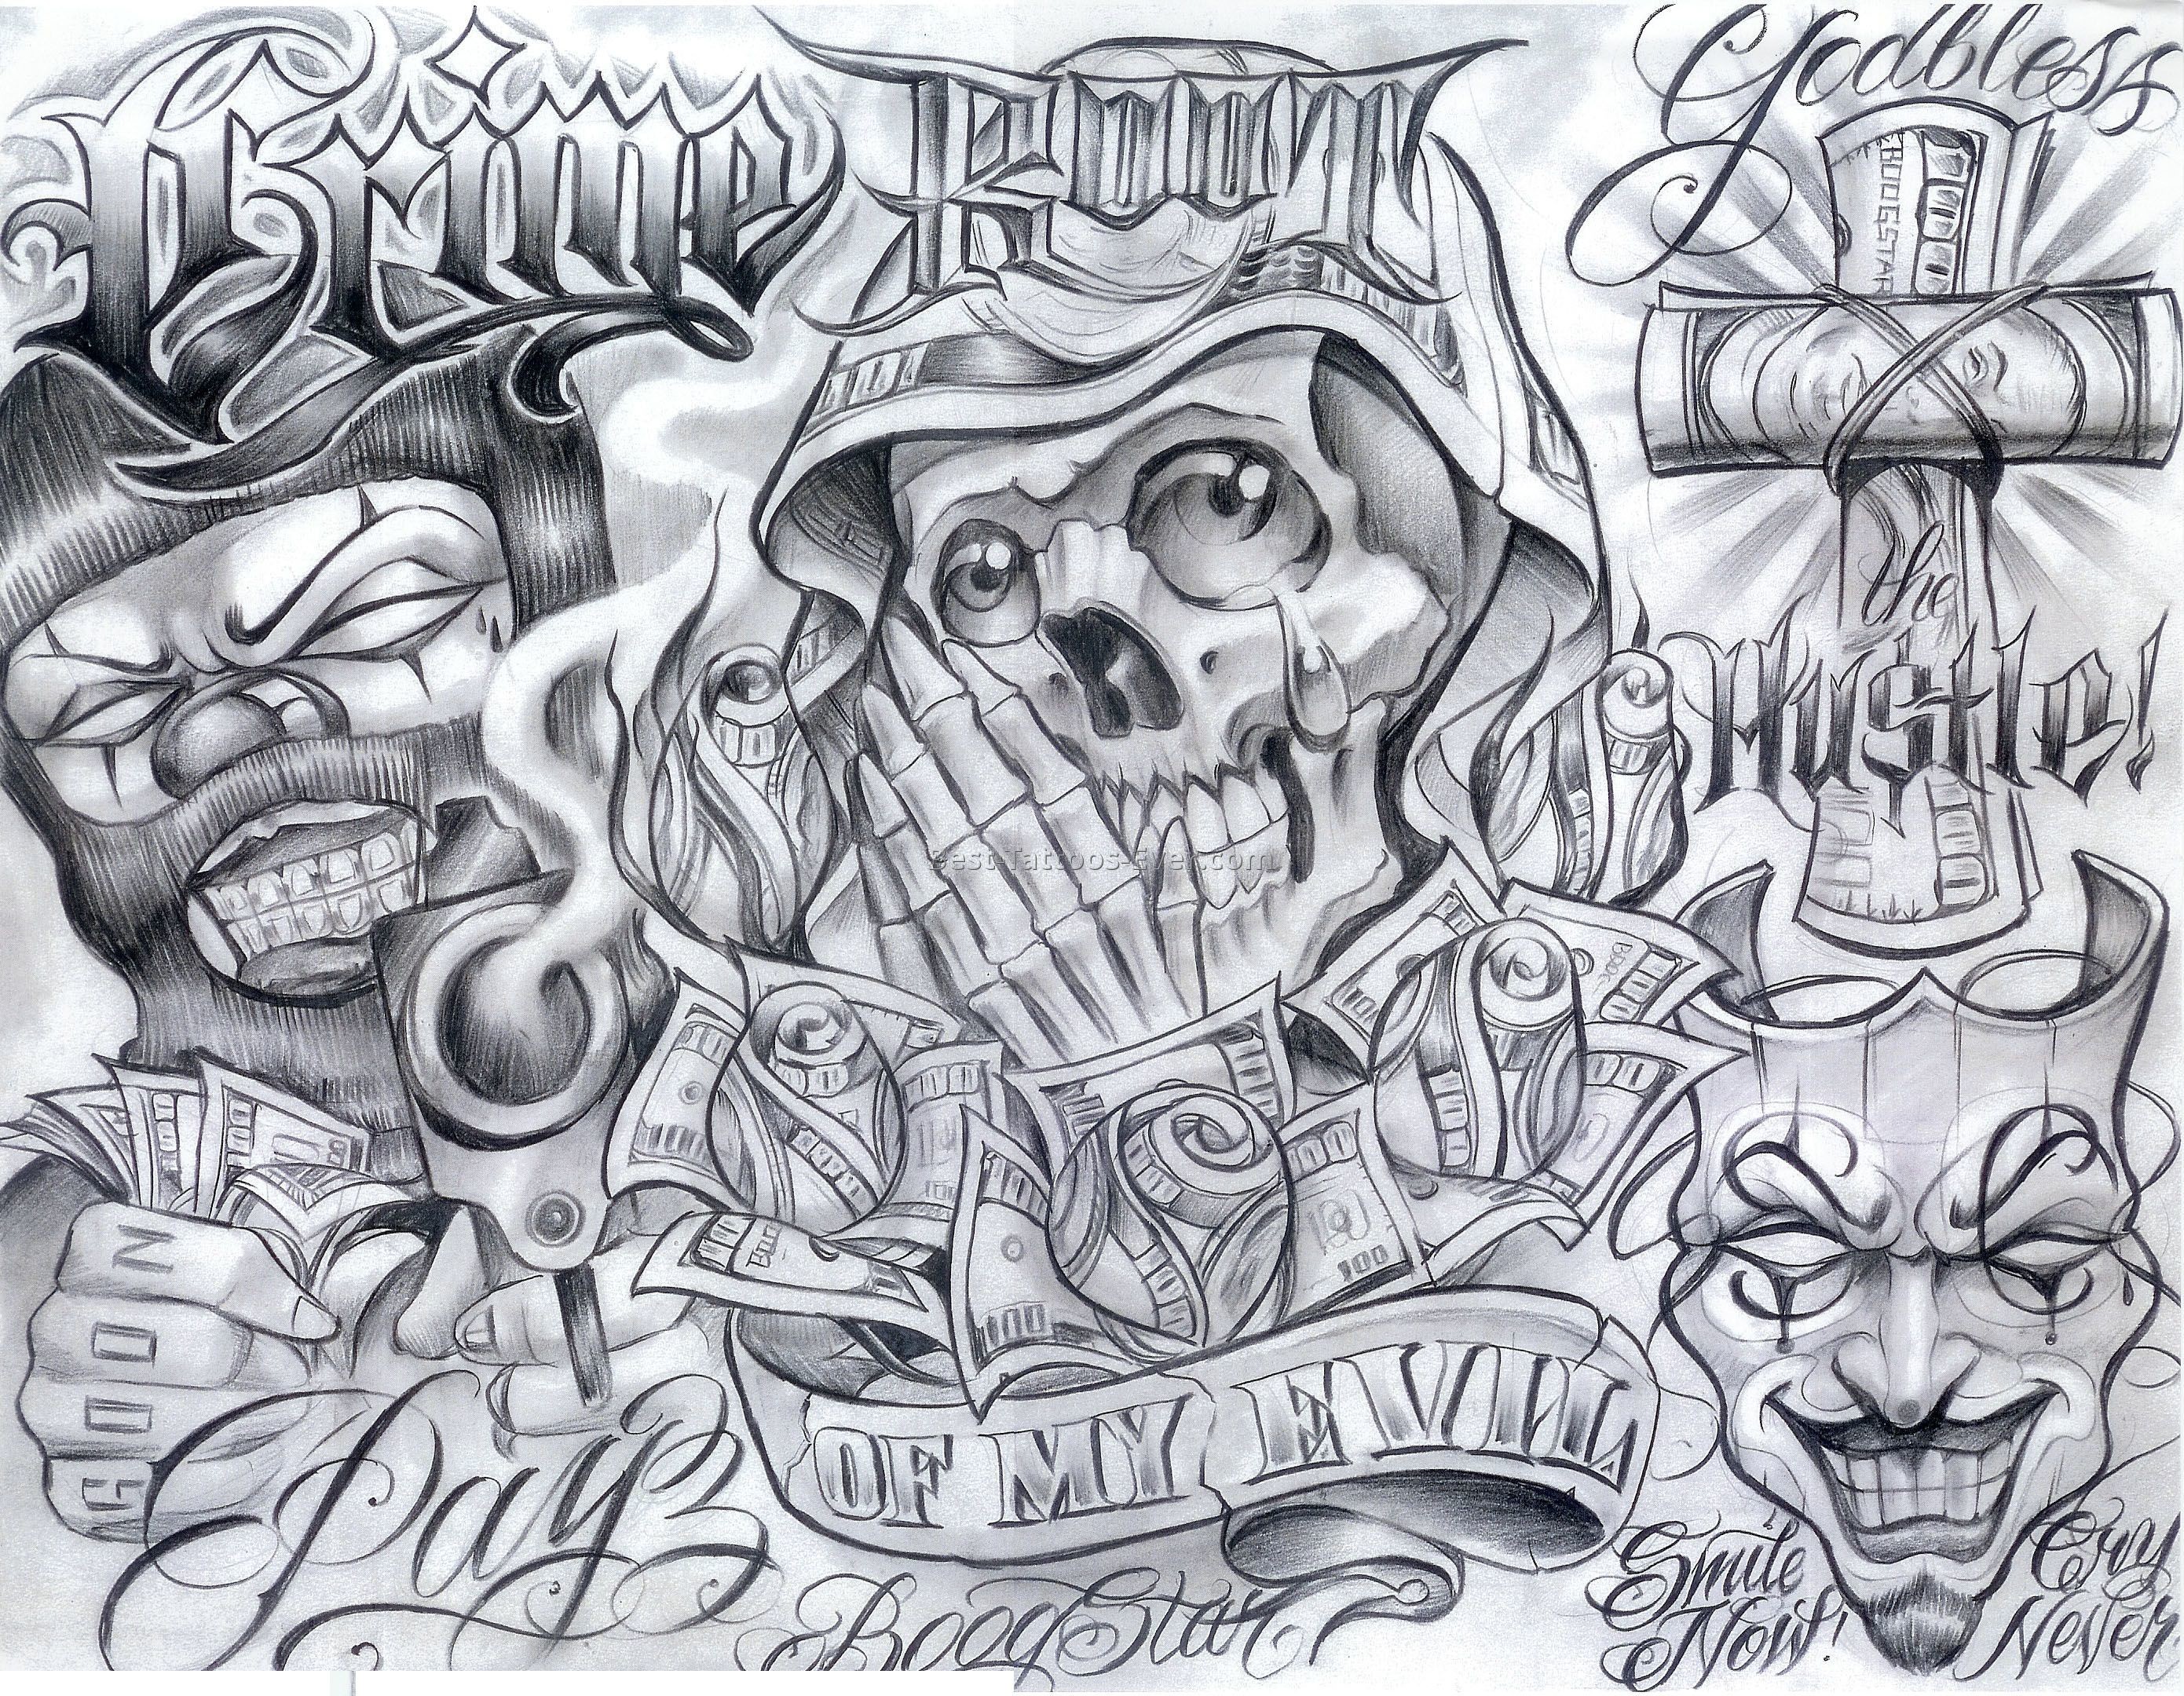 2781x2160 Chicano prison art pictures and ideas on meta networks chicano lowrider  gangster art drawings jpg 